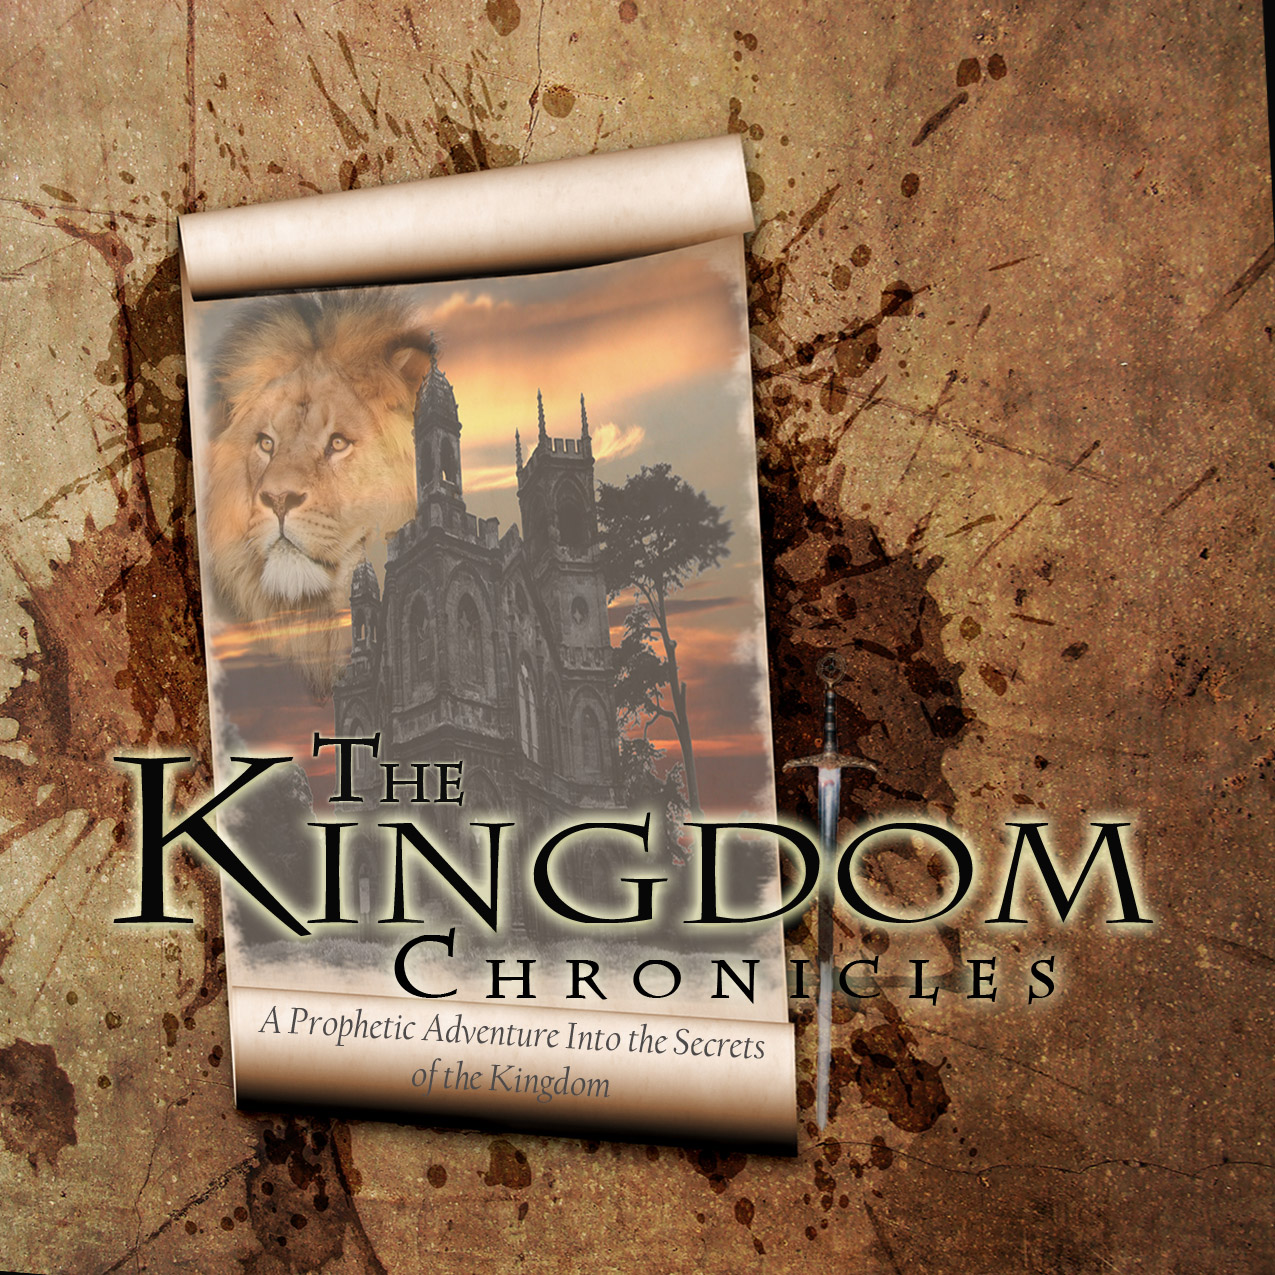 The Kingdom Chronicles - Lesson 6, ”The Pathway of Creativity”